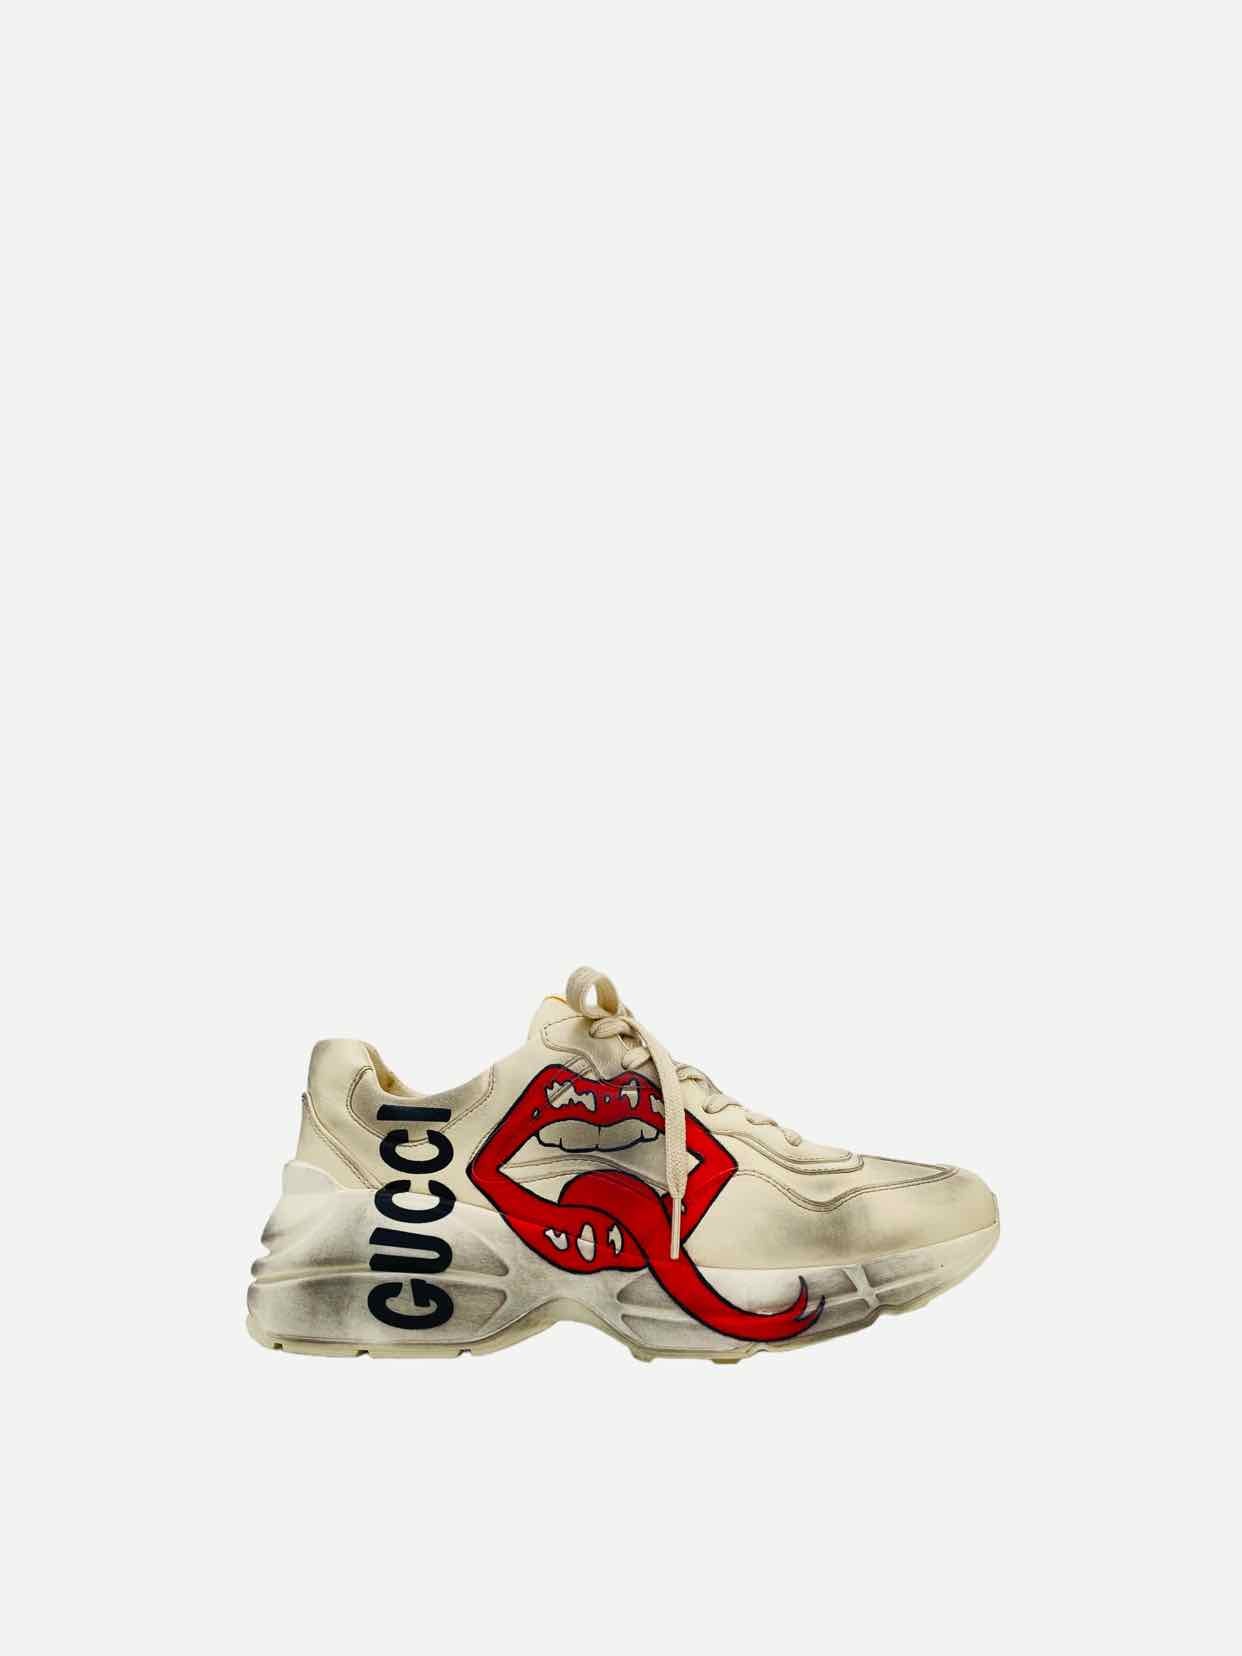 GUCCI Rython Off-white Mouth Print Sneakers